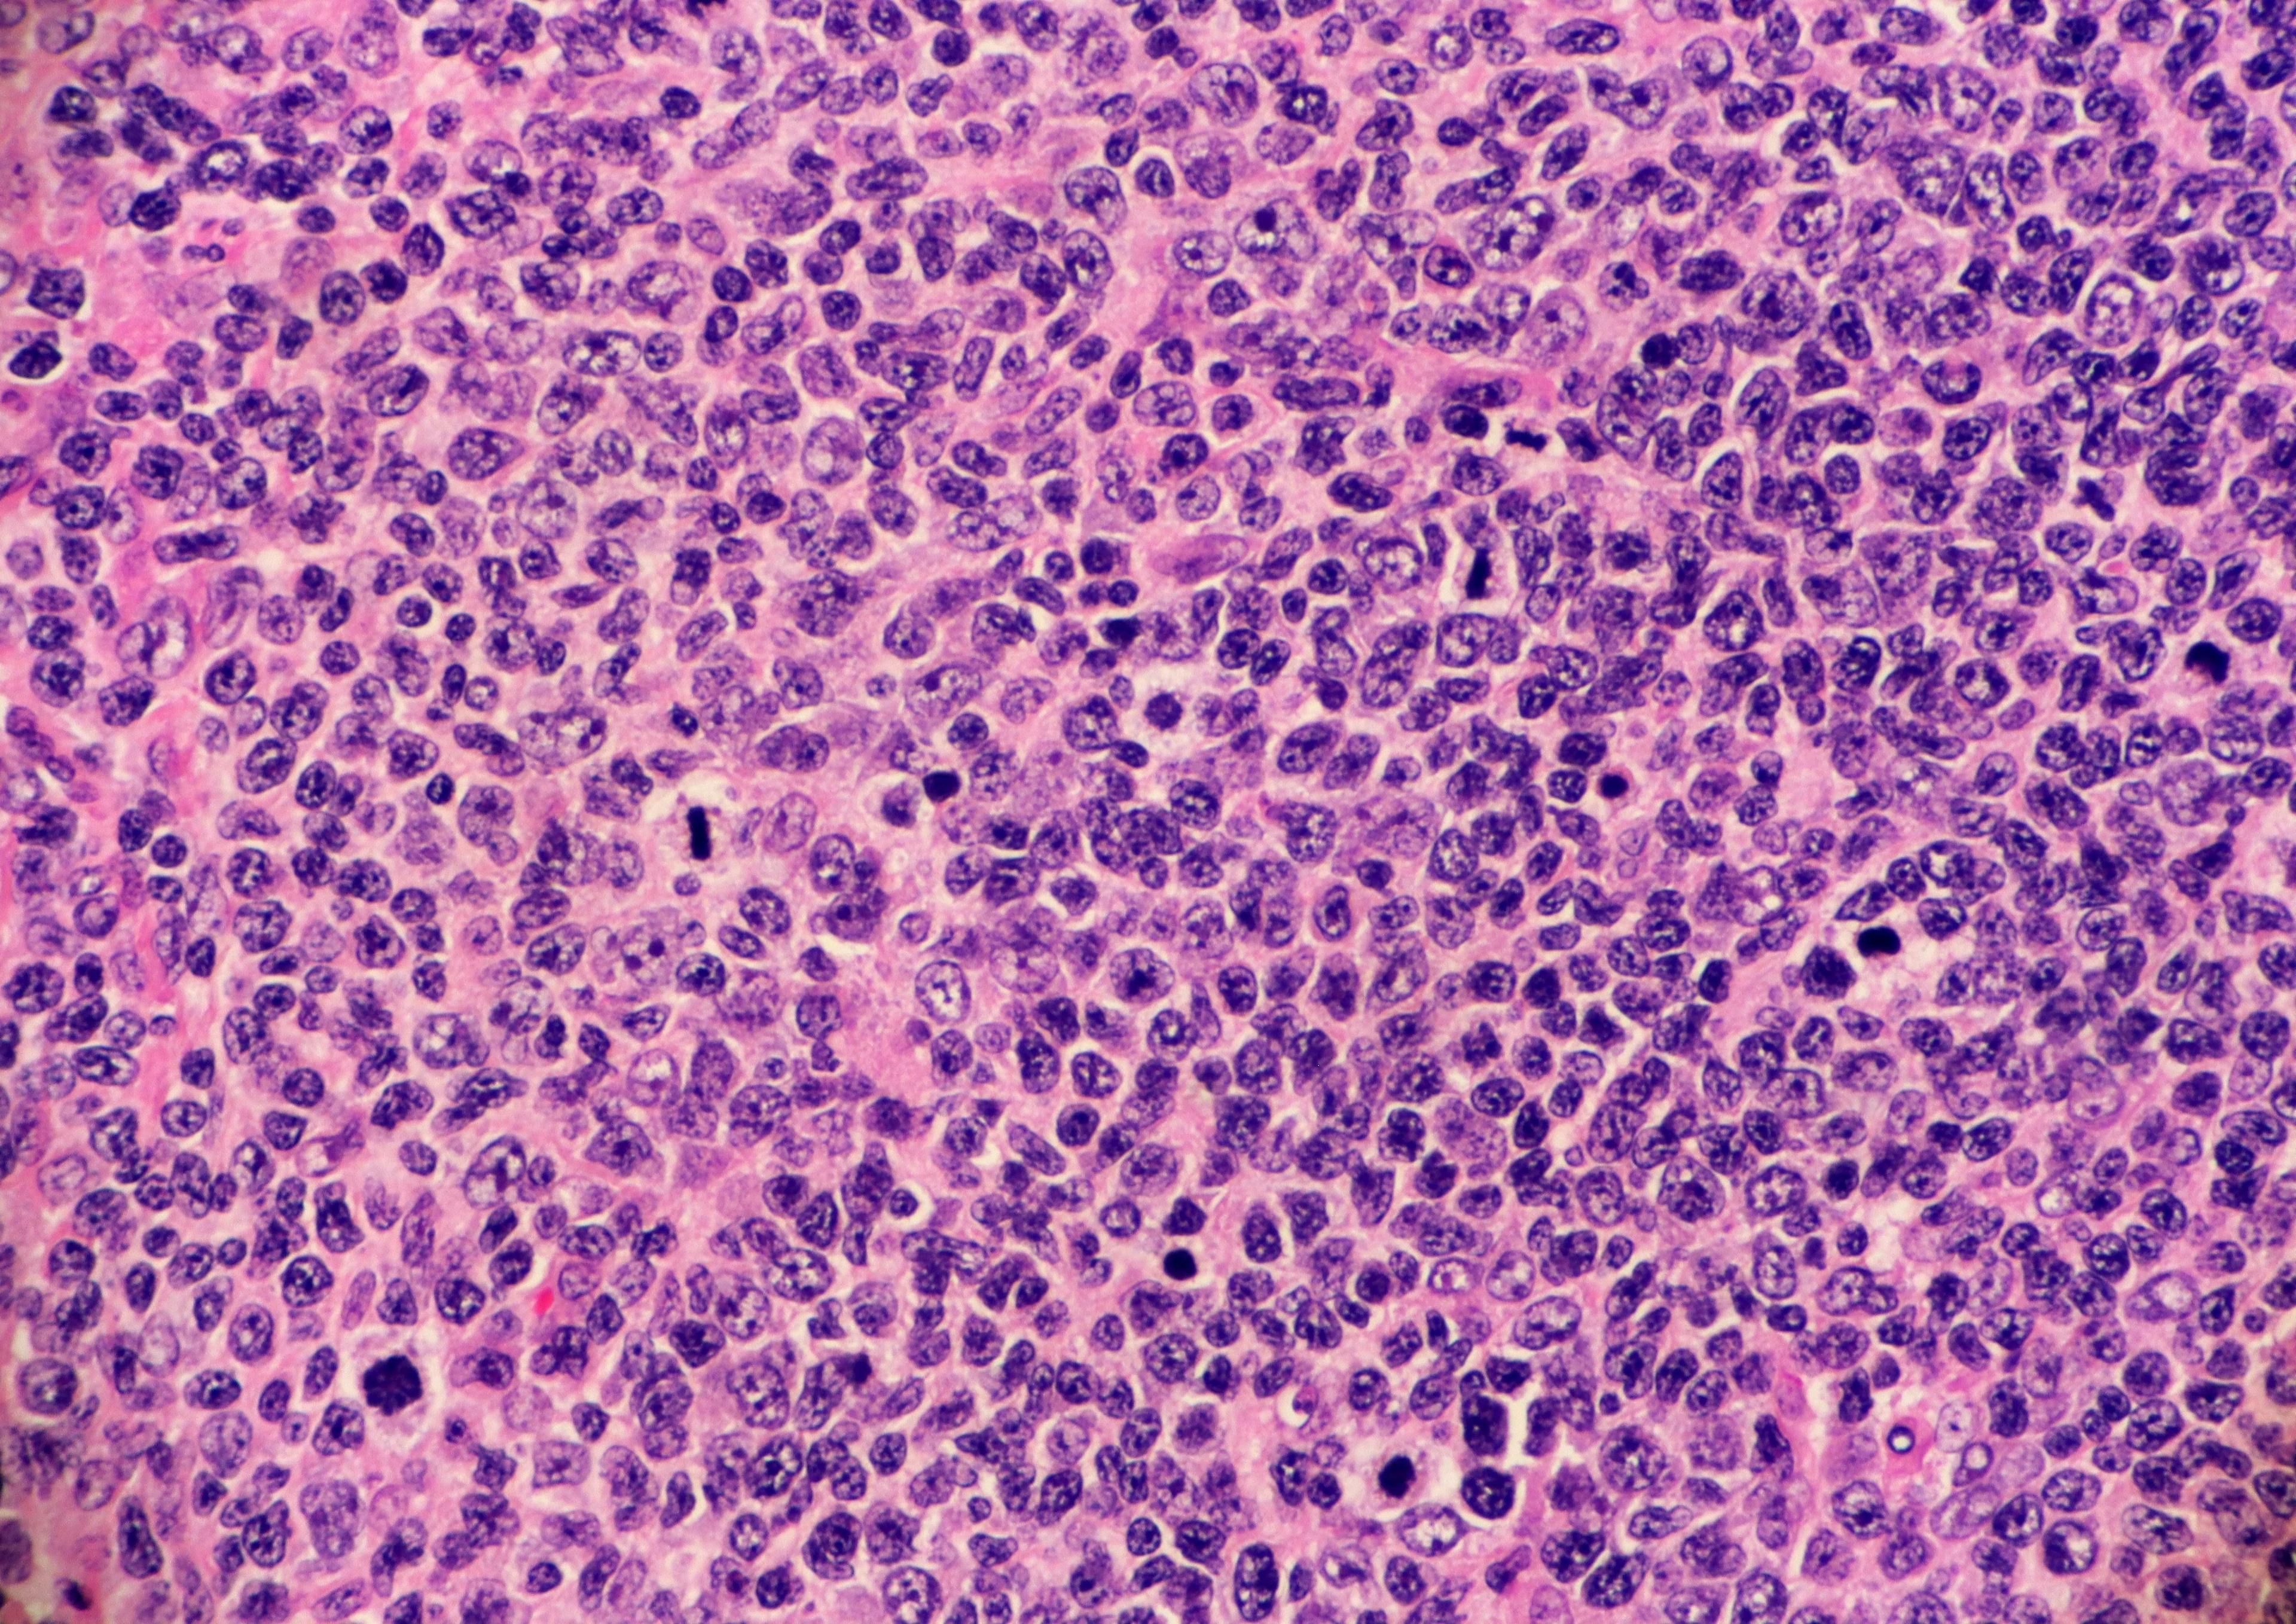 High grade follicular lymphoma with marginal zone differentiation. Multiple lymphocytes are undergoing mitosis. Microscopic view. | Image Credit: © Lisa - www.stock.adobe.com